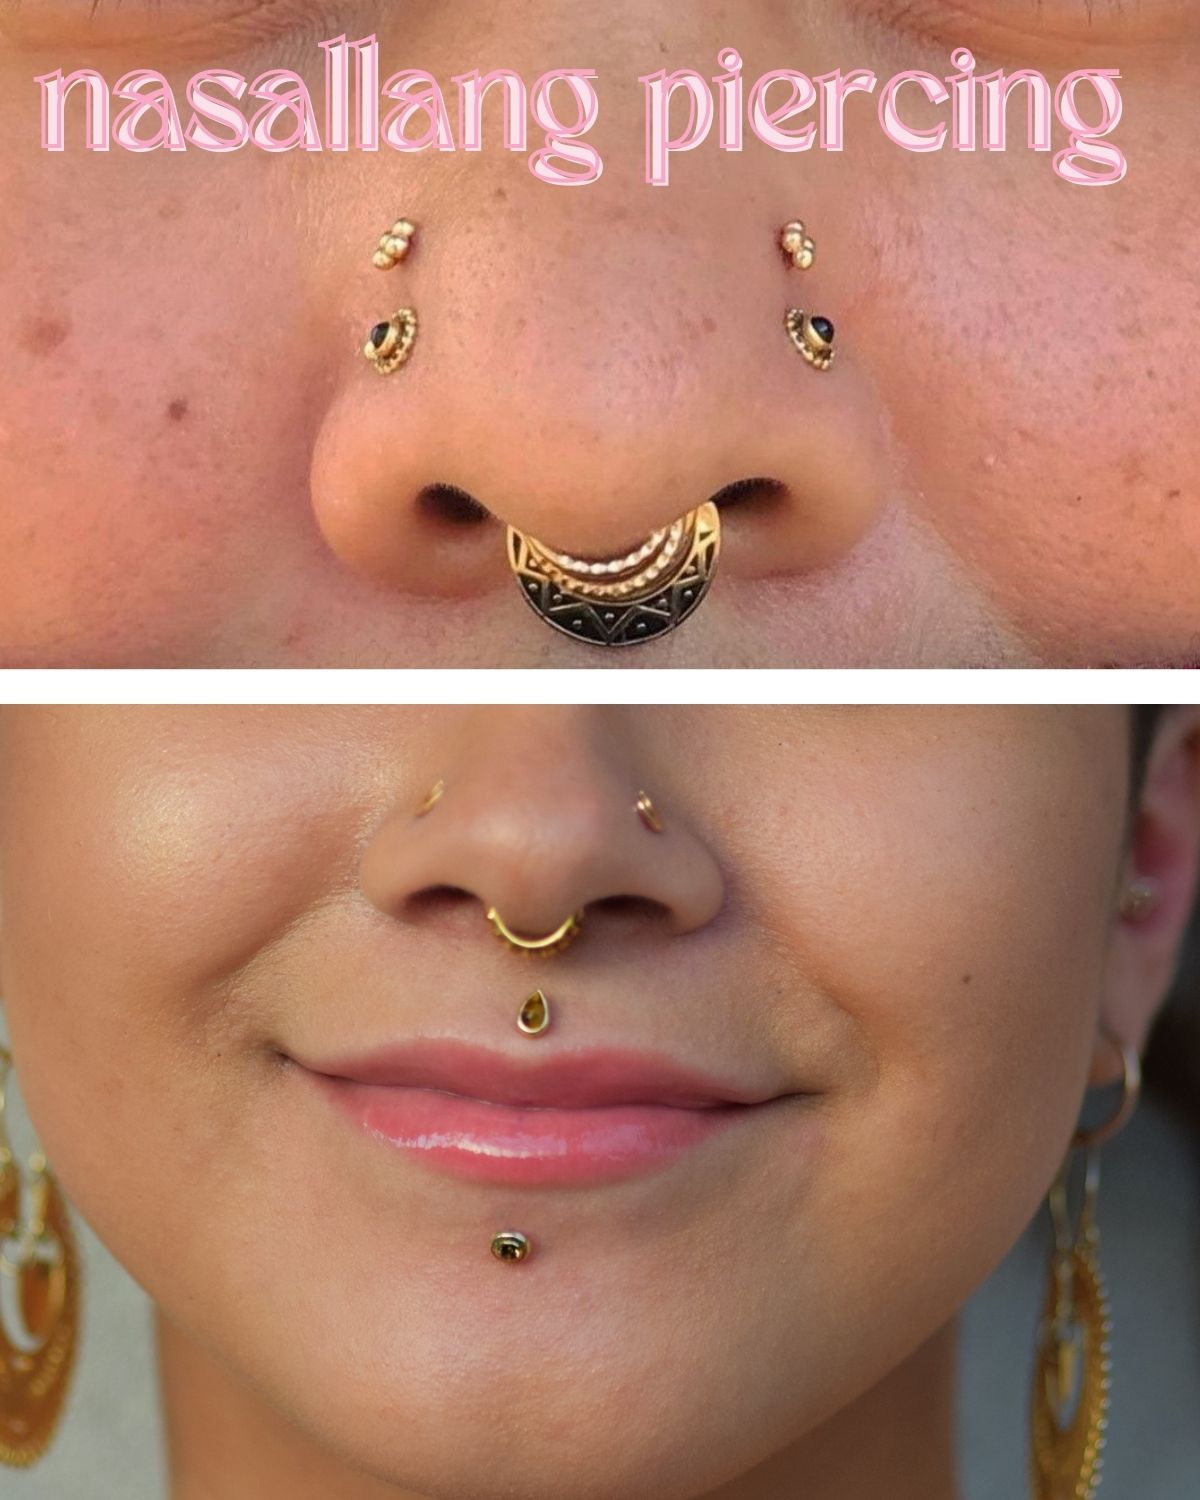 Nasallang piercings on two different women